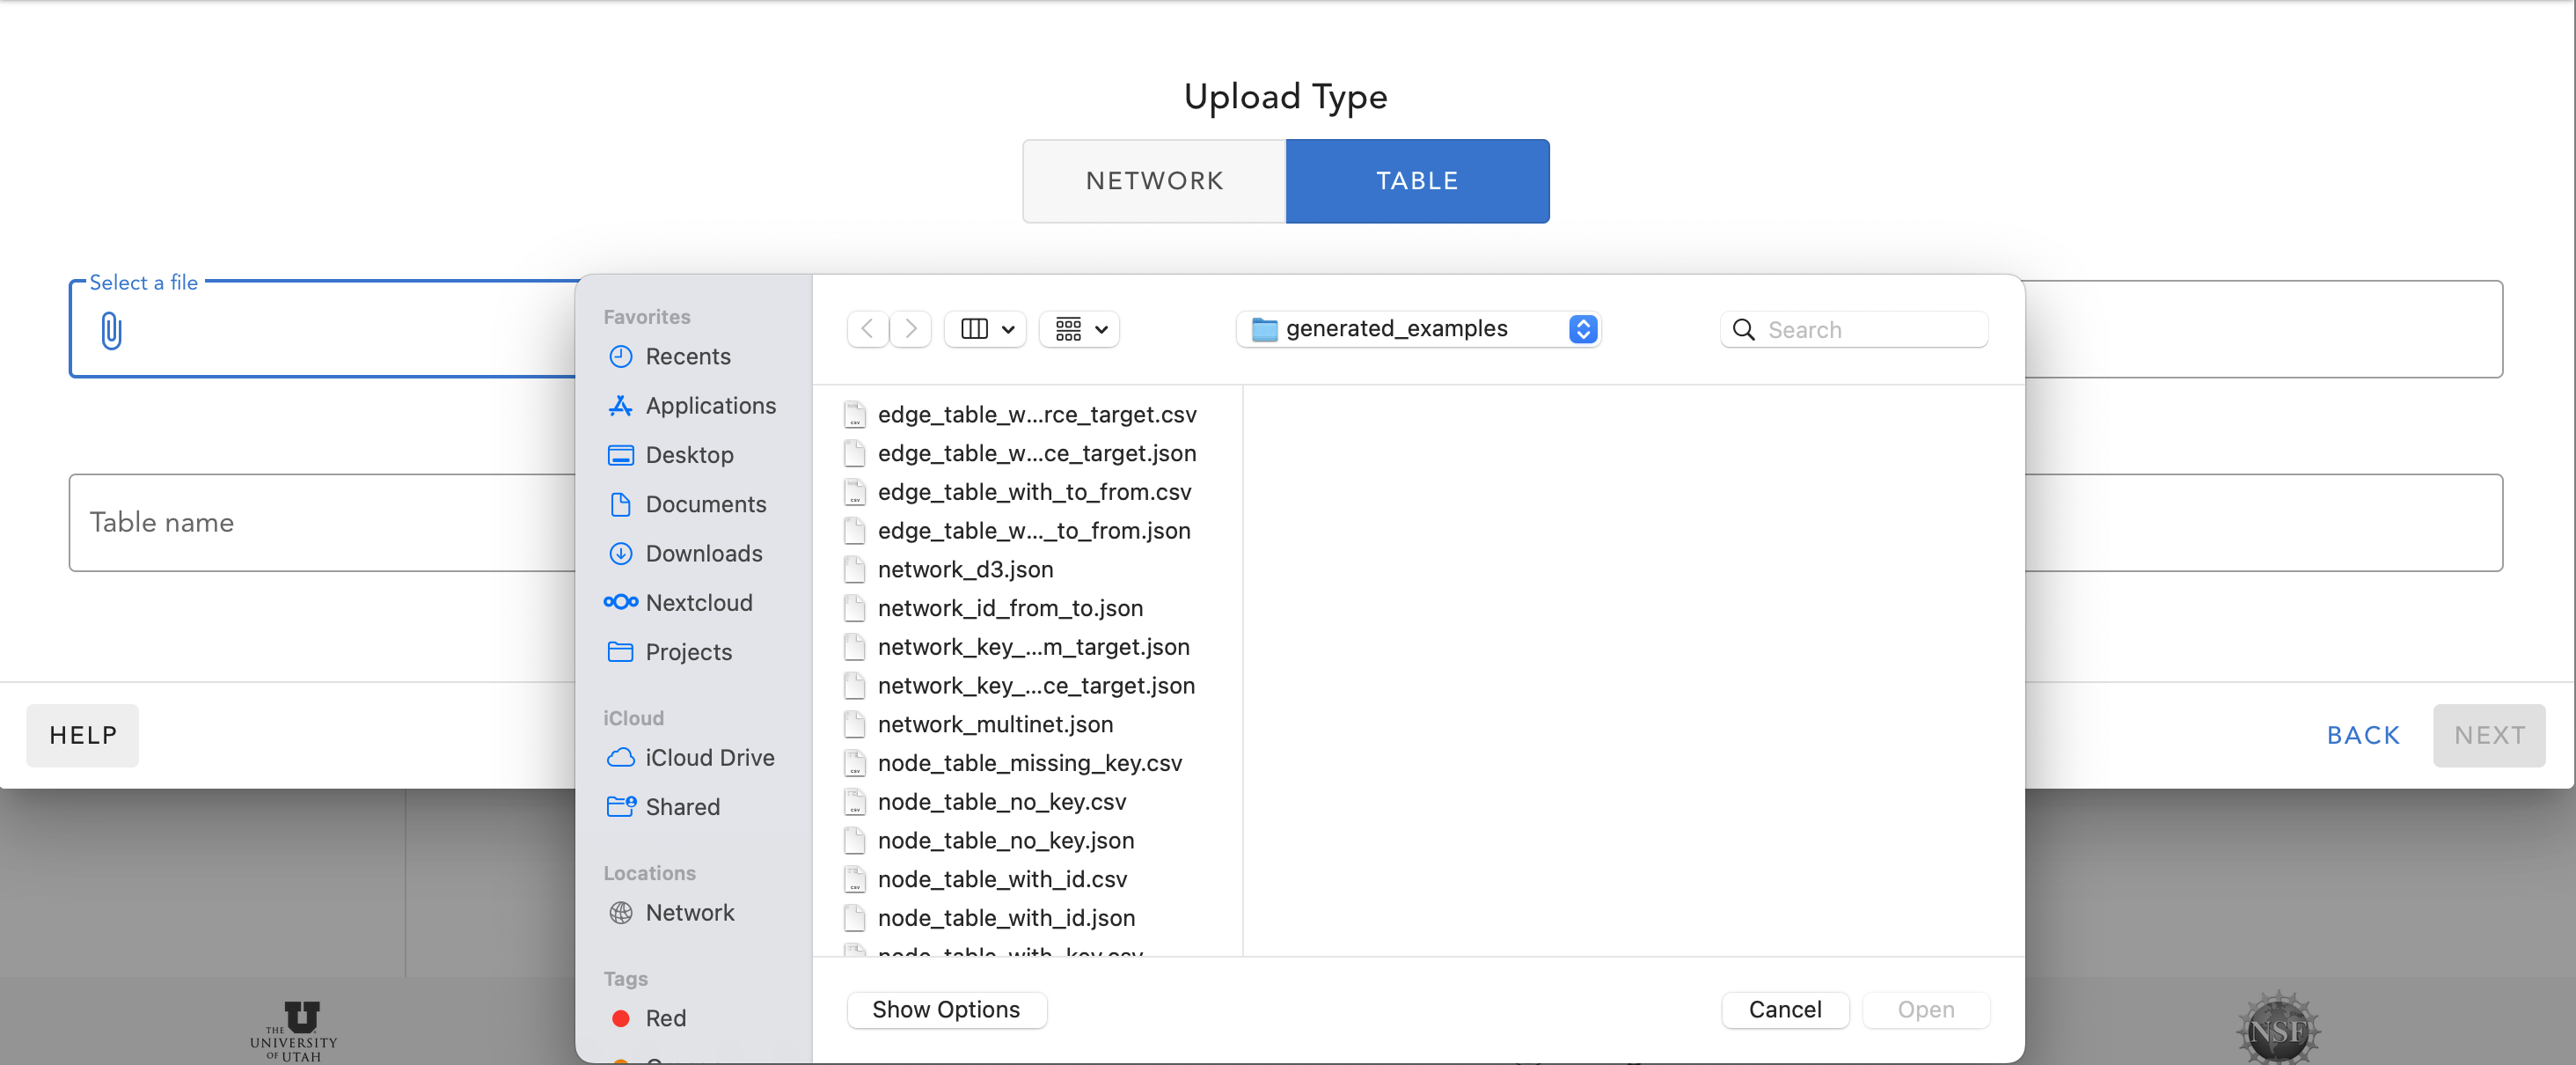 Upload table dialog